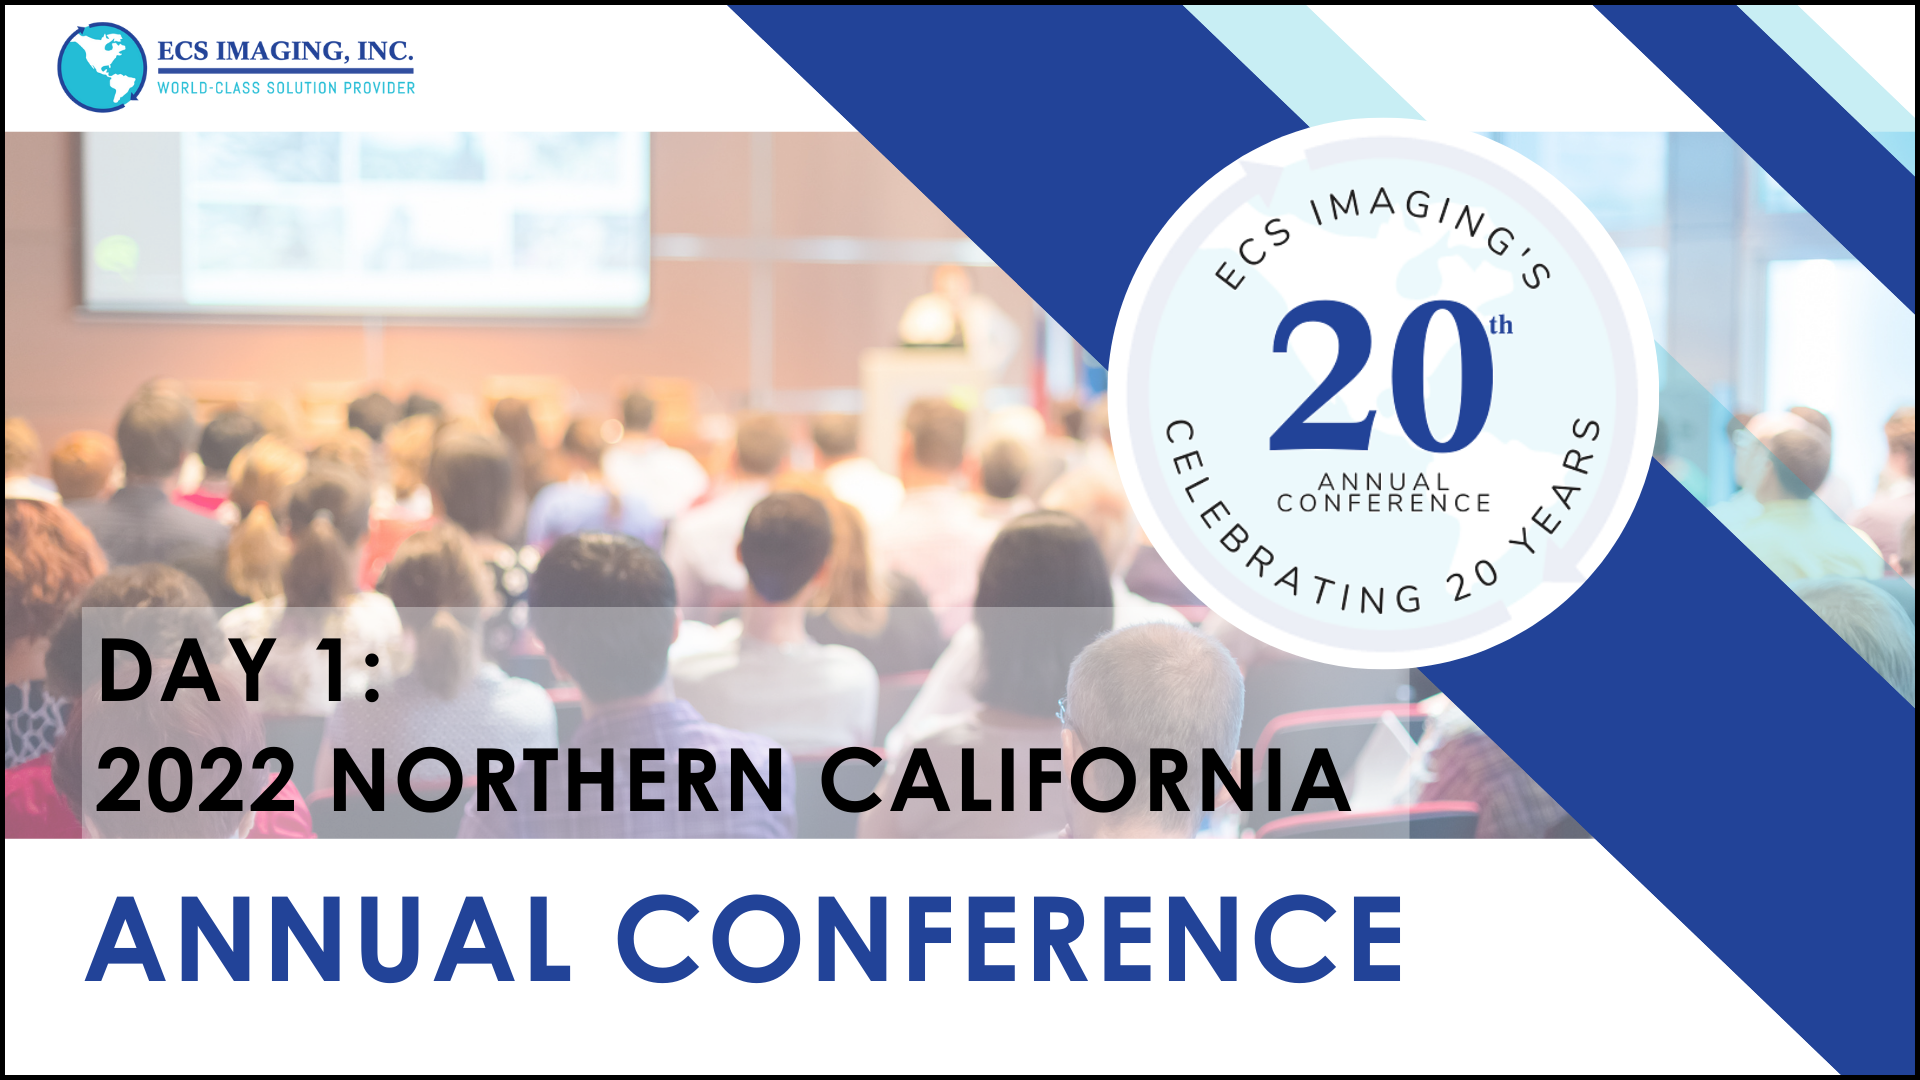 2022 Northern California Annual Conference Poster